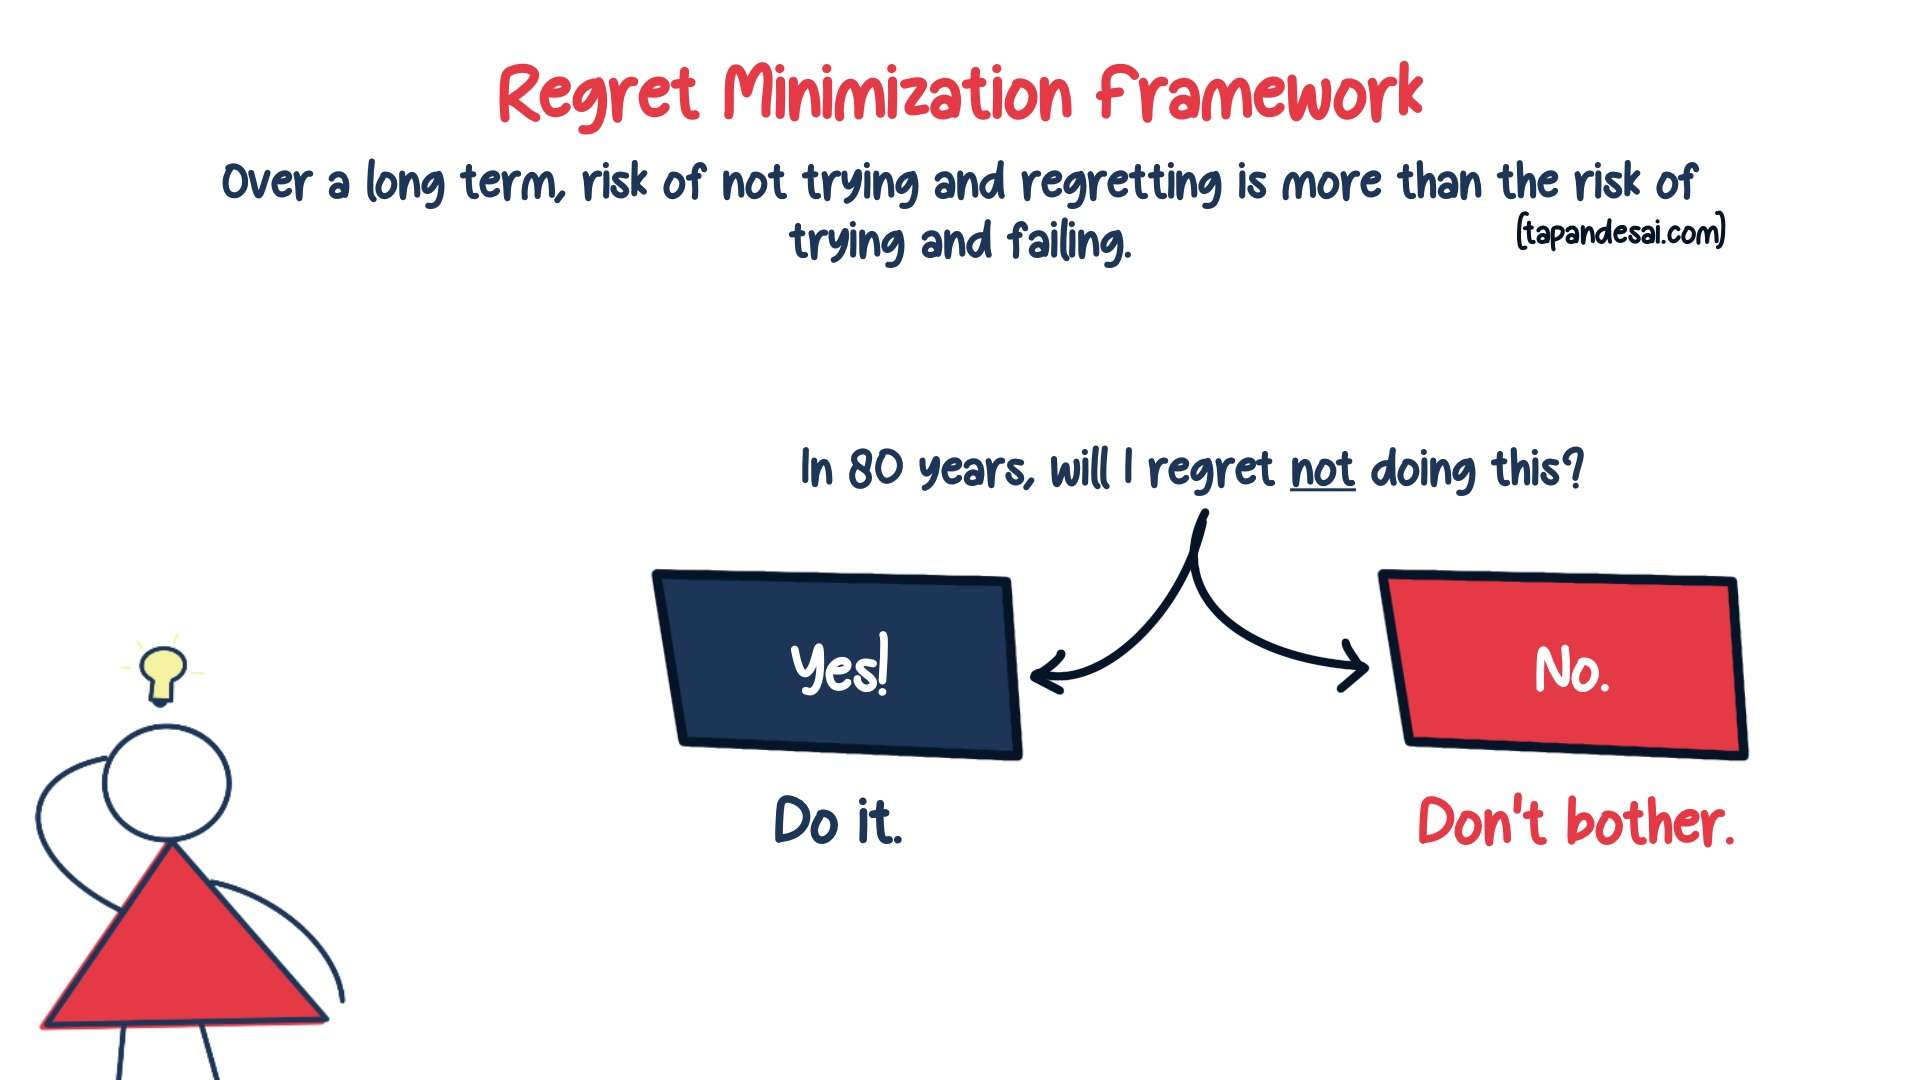 An image explained by Regret Minimization Framework by Jeff Bezos using a simple yes and no framework and definition of the regret minimization framework.